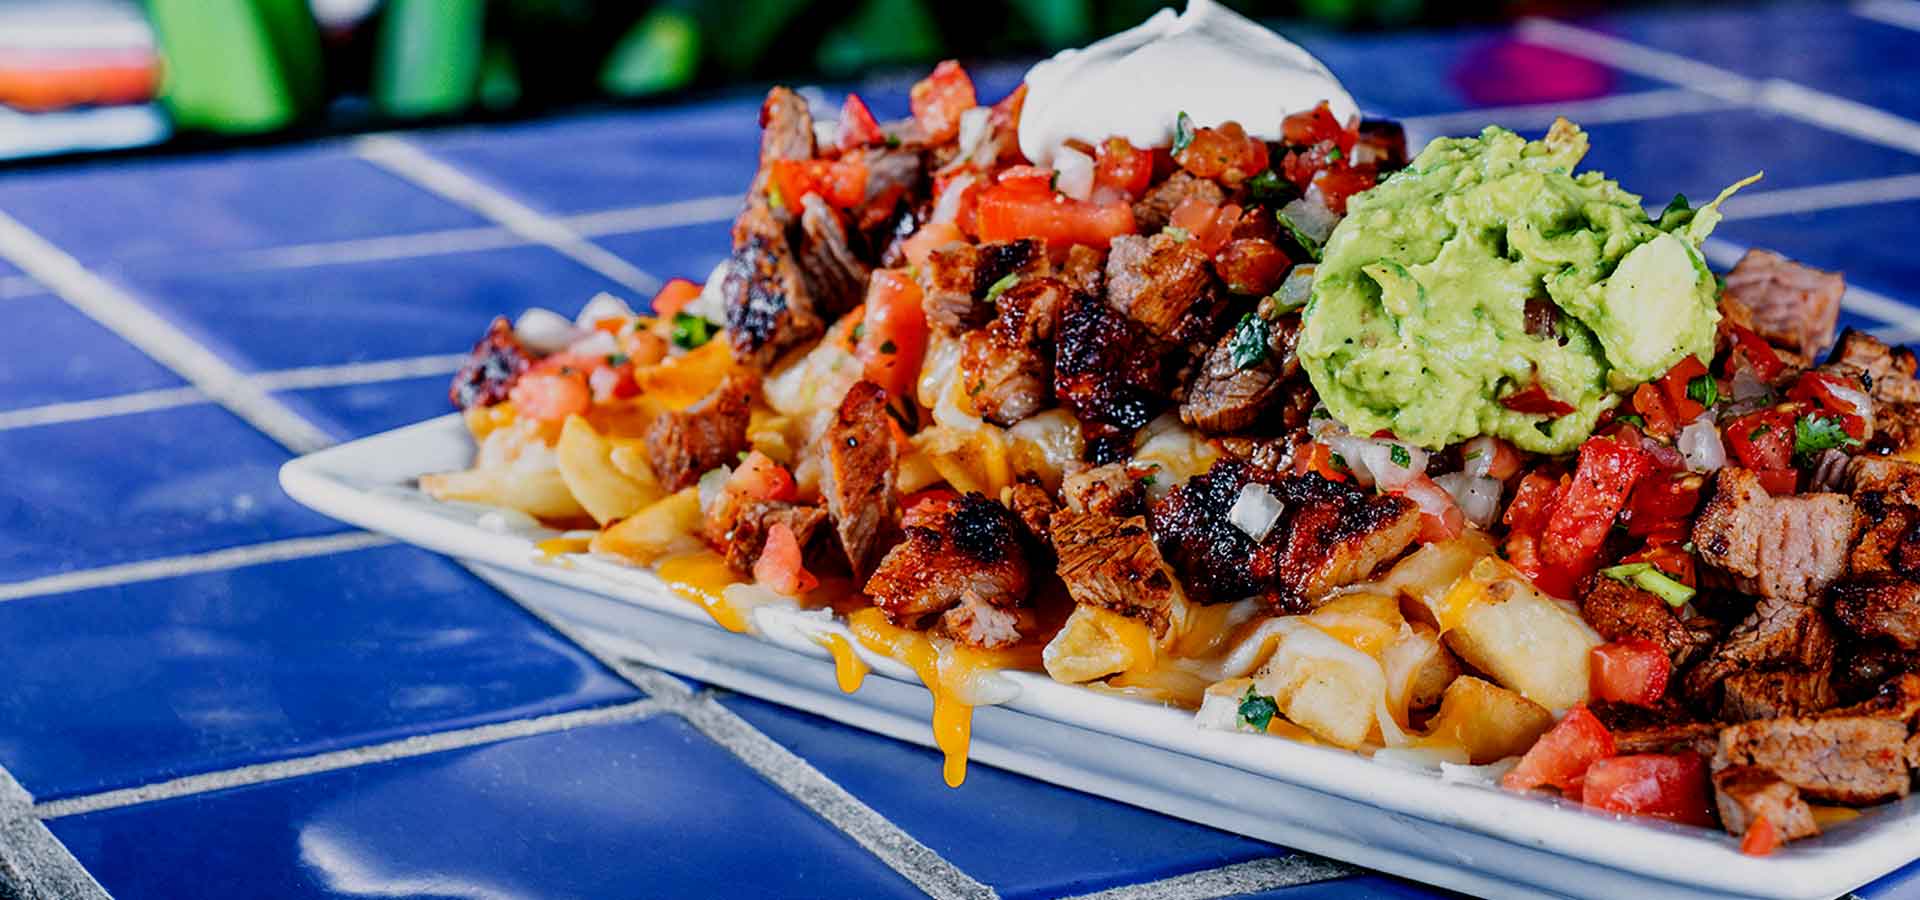 A plate of our carne asada fries, one our discounted appetizers during happy hour